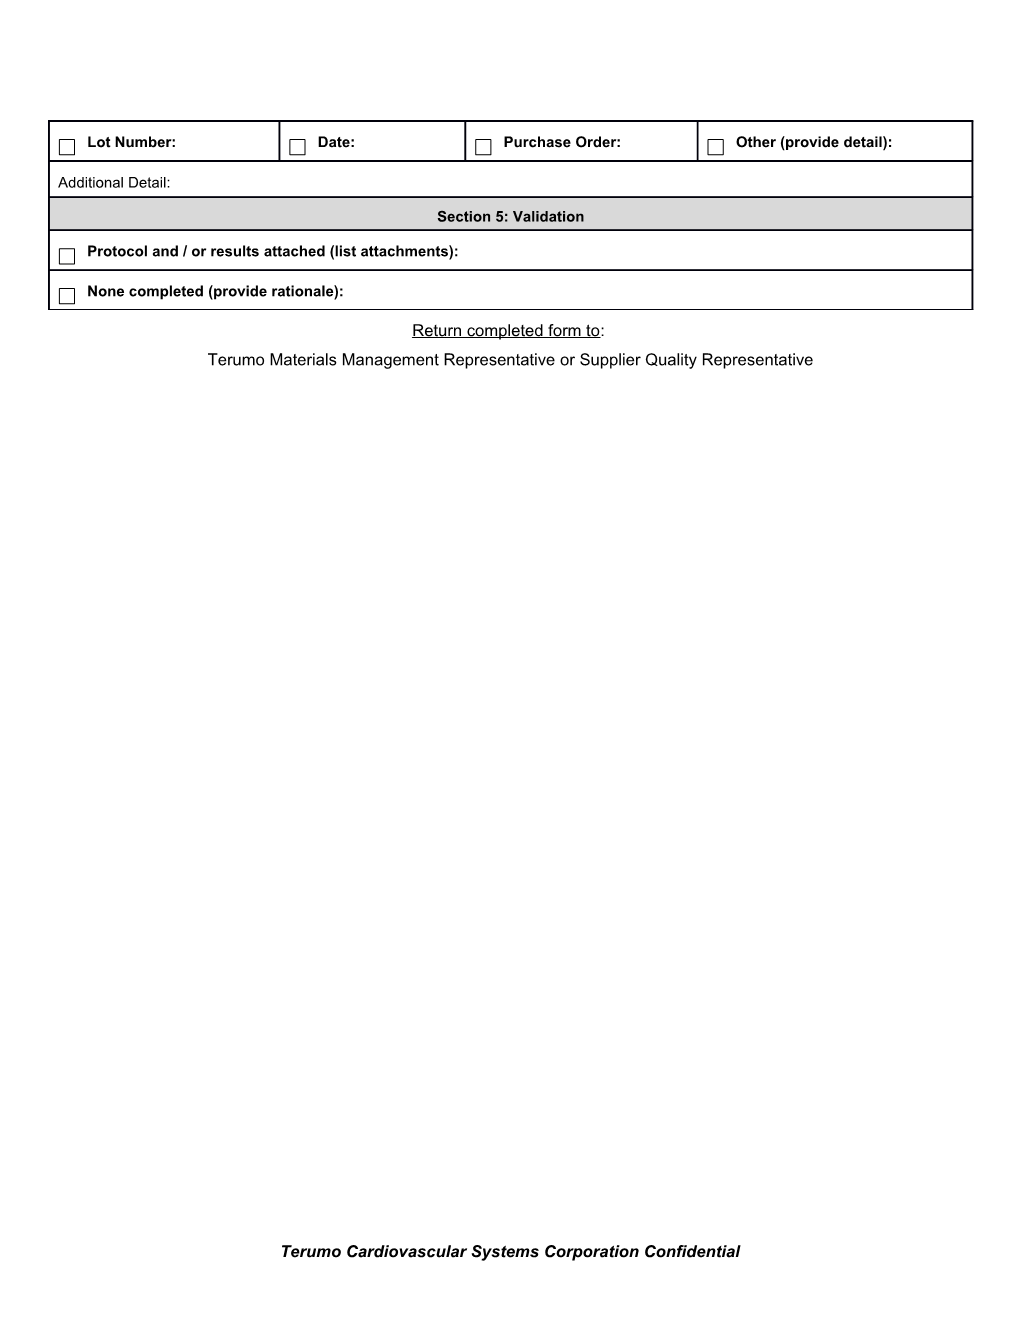 Reference WI Supplier Proposal for Change Ann Arbor, 852642, for Instructions